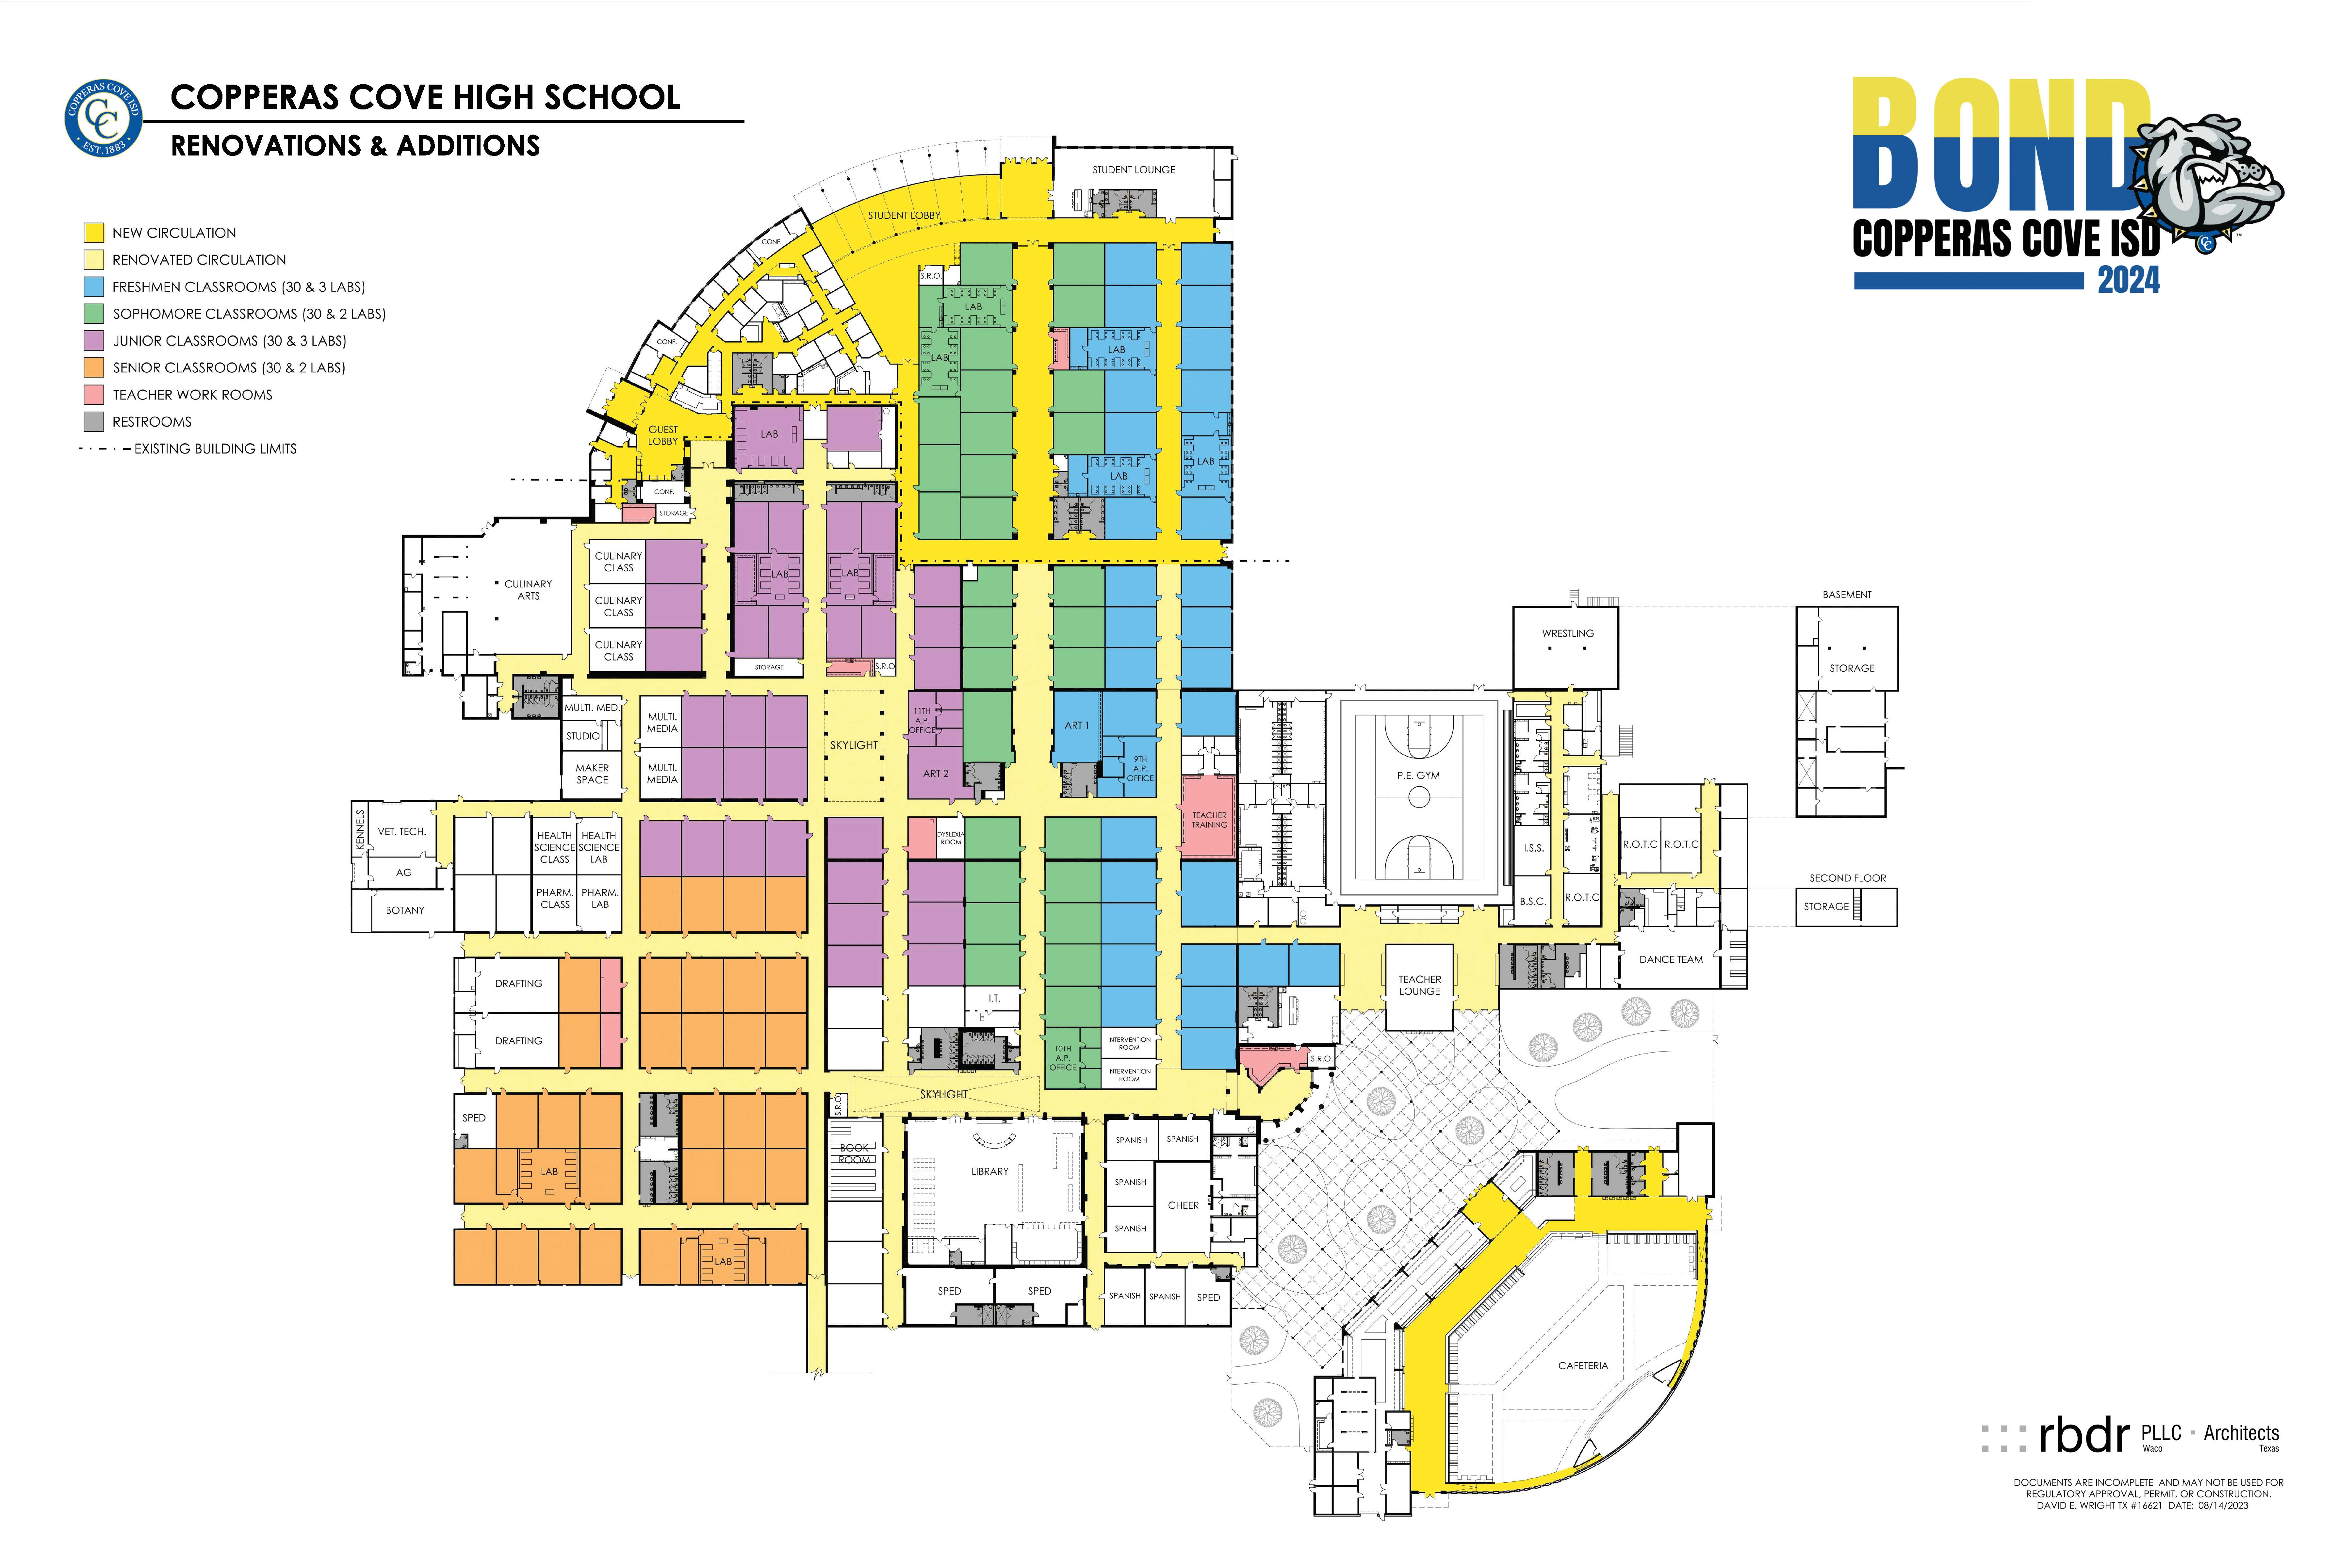 Proposed floor plan of a renovated Copperas Cove High School. 